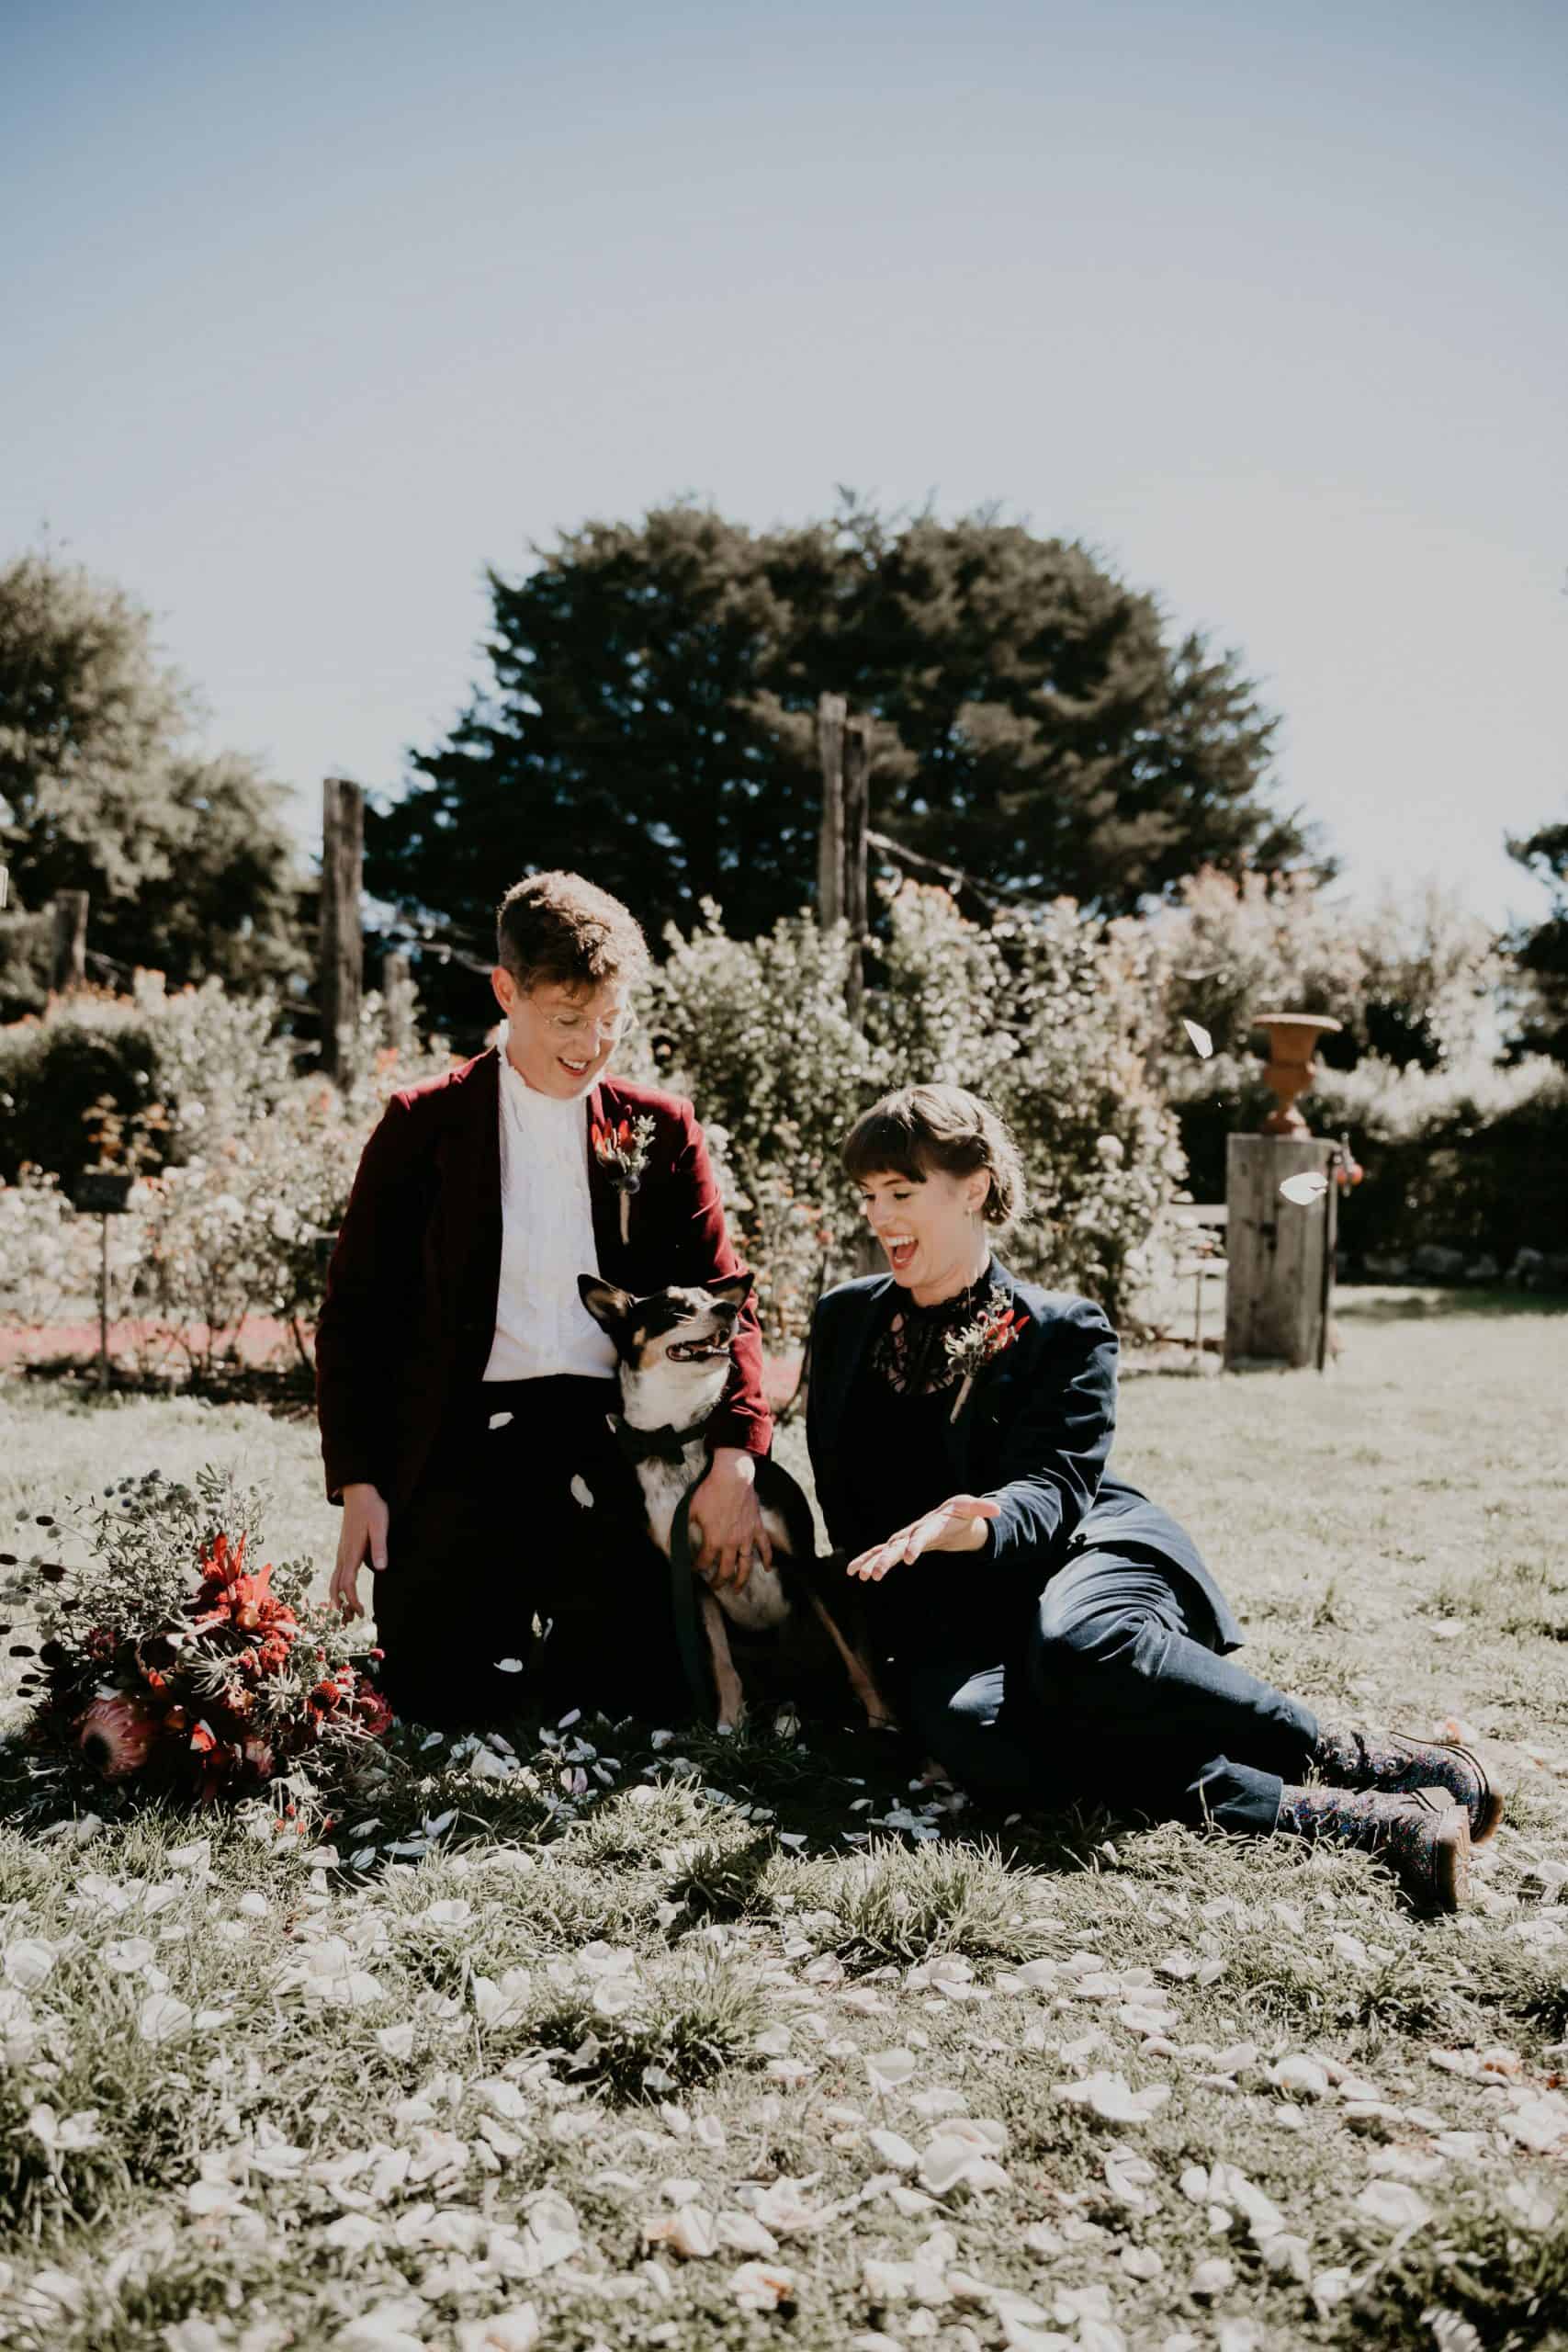 Couple sits with their dog in the sun how to elope Intimate Wedding ceremony Melbourne Let's Elope Melbourne Celebrant Photographer Elopement Package Victoria Sarah Matler Photography Acre of Roses weddings intimate